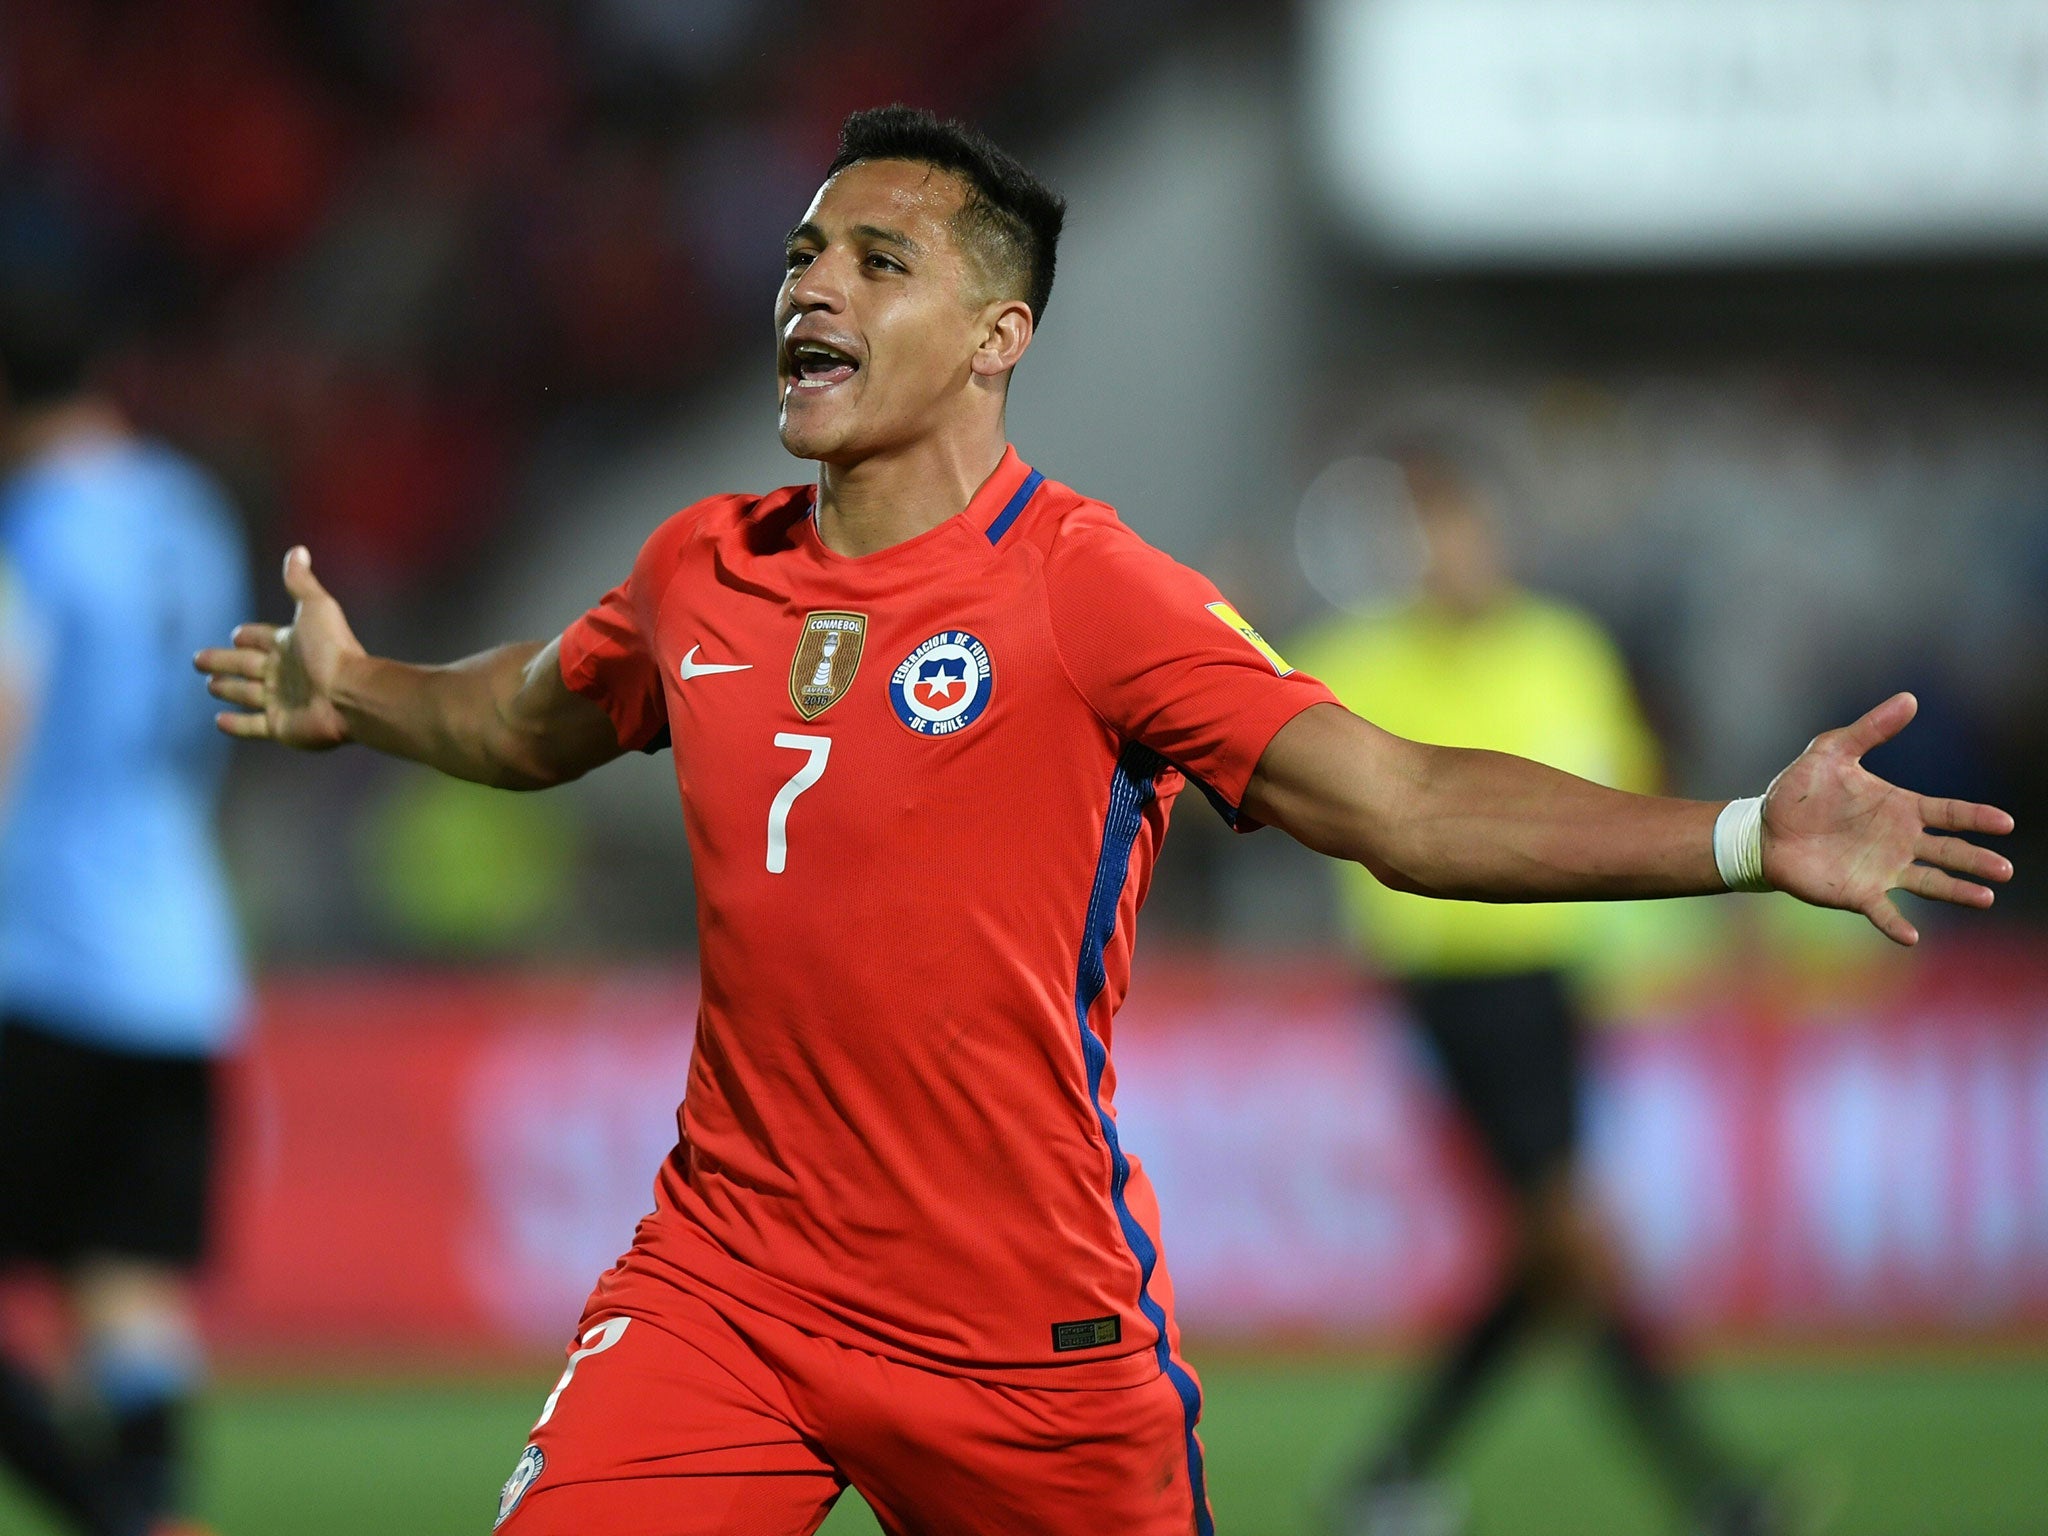 Alexis Sanchez came through 84 minutes for Chile despite suffering an injury last week